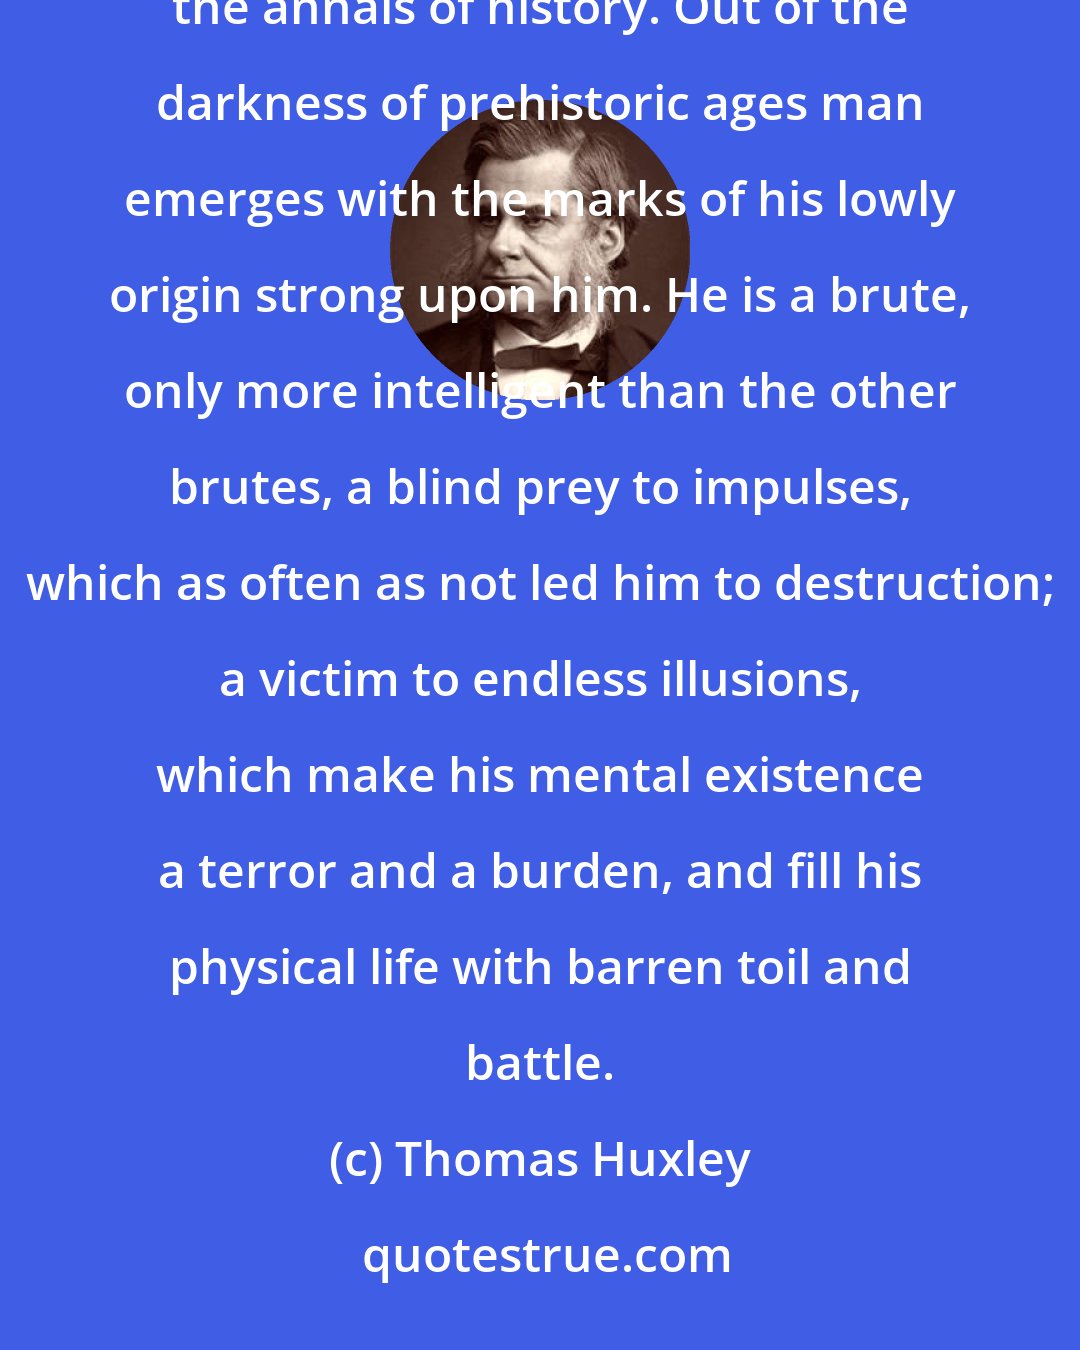 Thomas Huxley: I know no study which is so unutterably saddening as that of the evolution of humanity, as it is set forth in the annals of history. Out of the darkness of prehistoric ages man emerges with the marks of his lowly origin strong upon him. He is a brute, only more intelligent than the other brutes, a blind prey to impulses, which as often as not led him to destruction; a victim to endless illusions, which make his mental existence a terror and a burden, and fill his physical life with barren toil and battle.